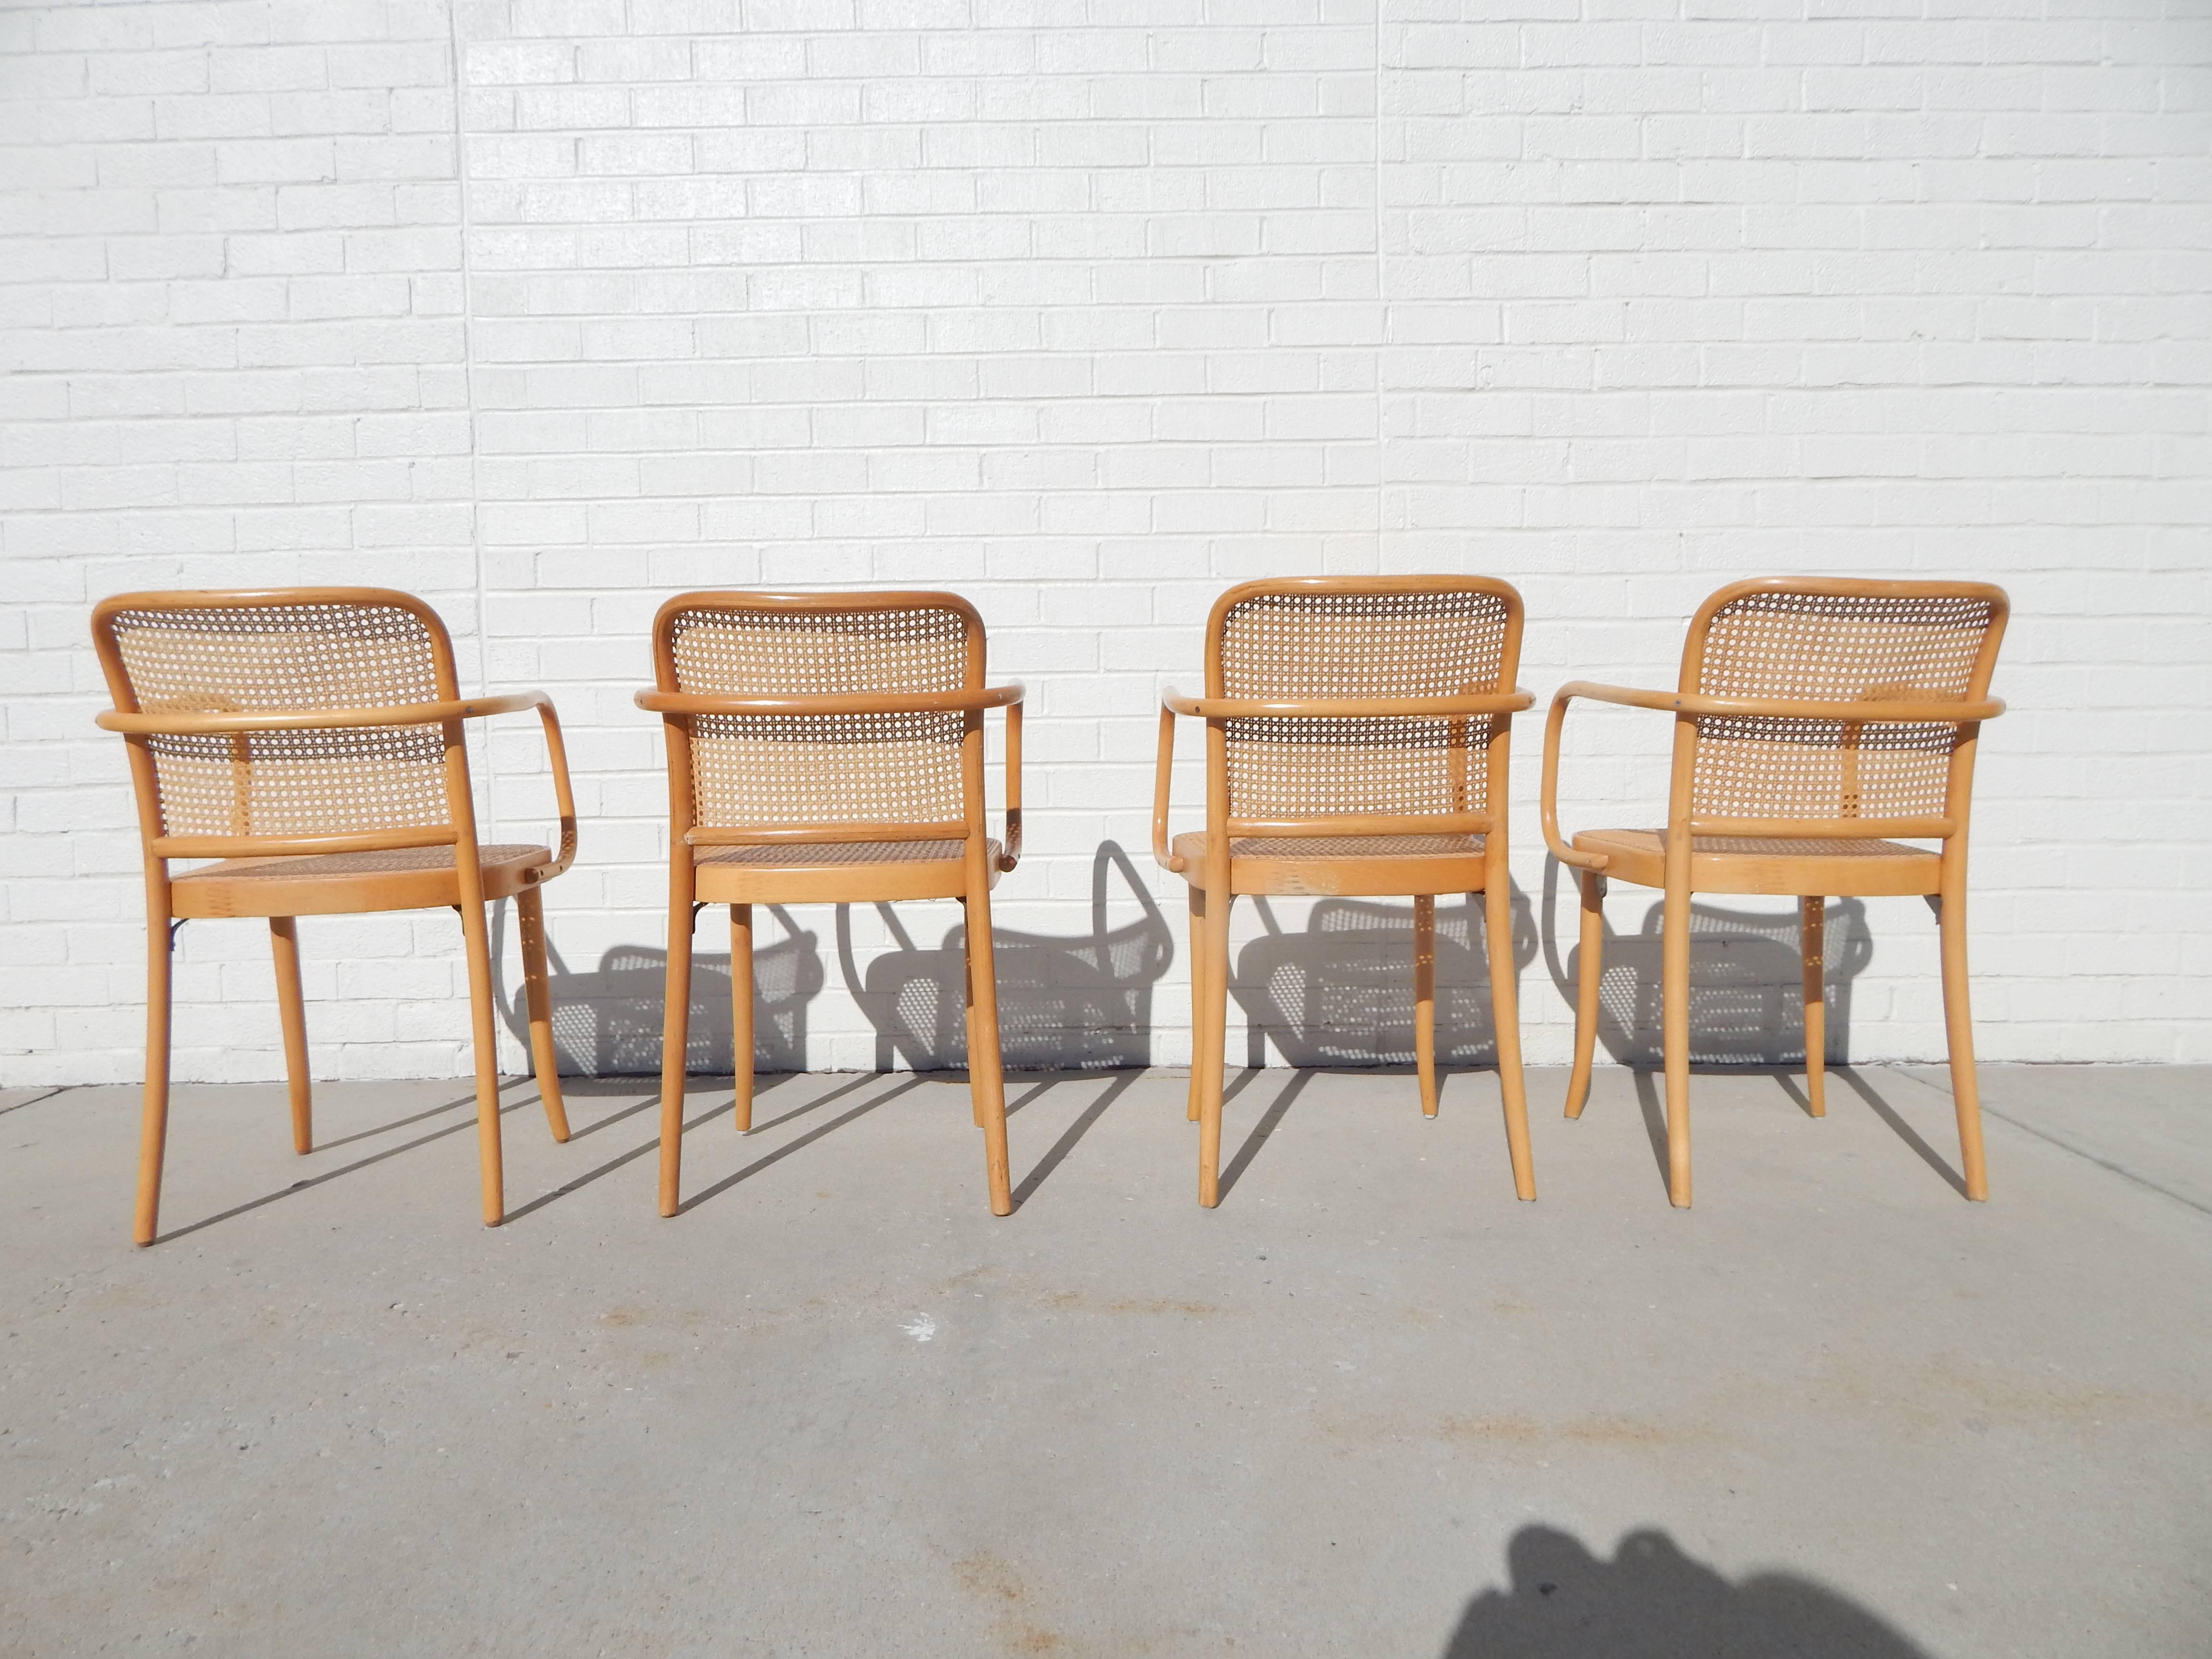 Set of four bentwood and cane armchairs or dining chairs. All caning is in excellent condition. Bentwood frames exhibit minor wear.